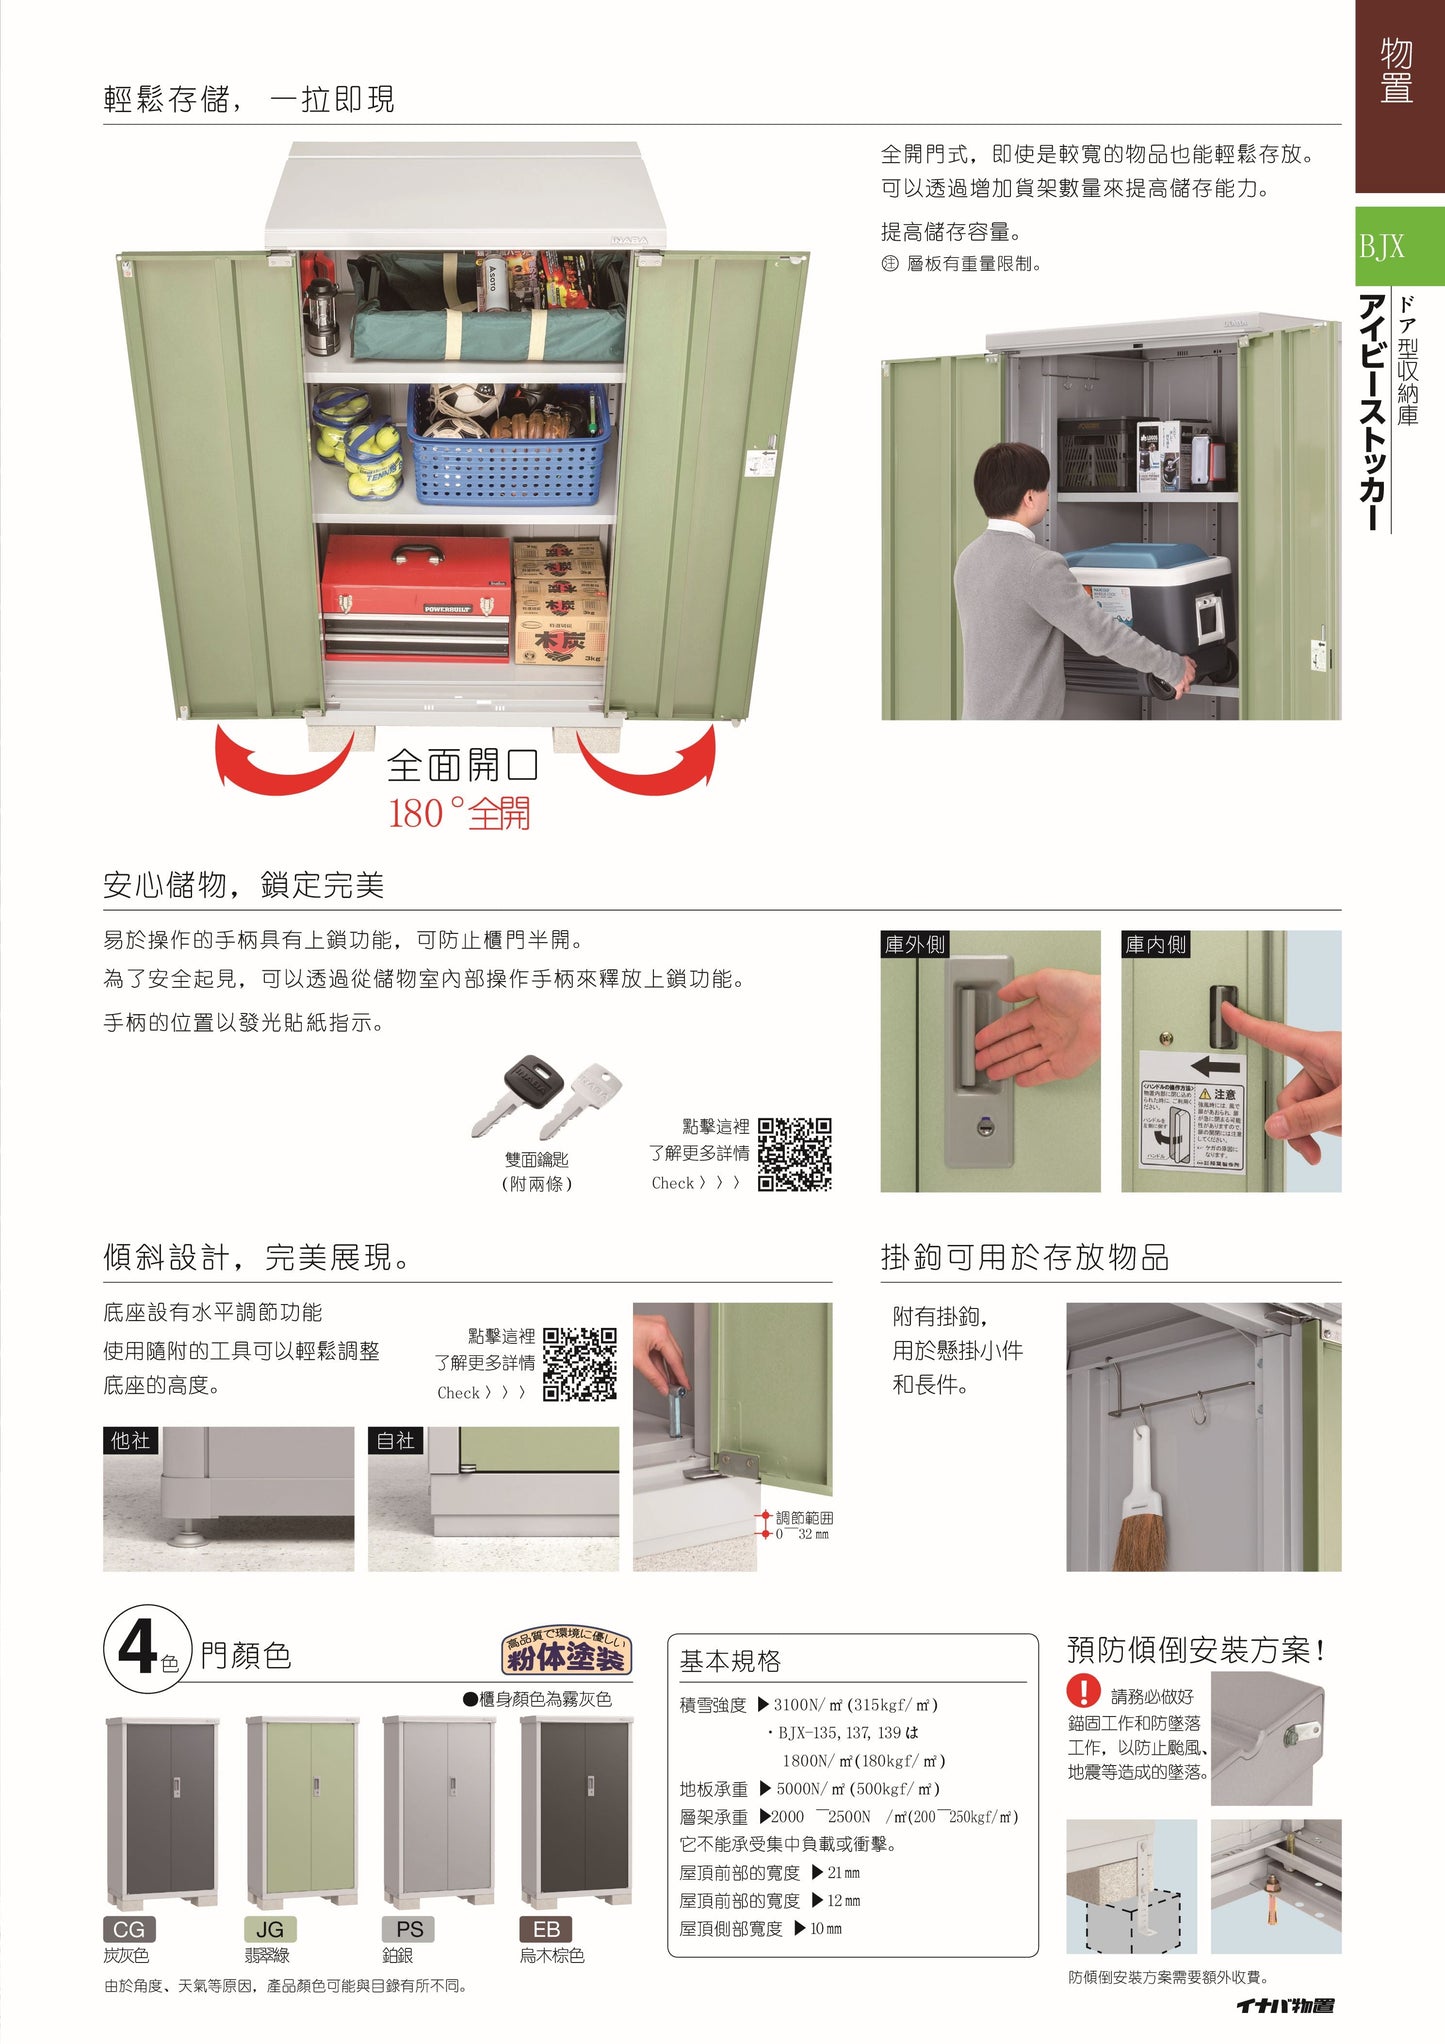 *Pre-order* Inaba Outdoor Storage BJX-065E (W620XD548XH1903mm) 0.647m3